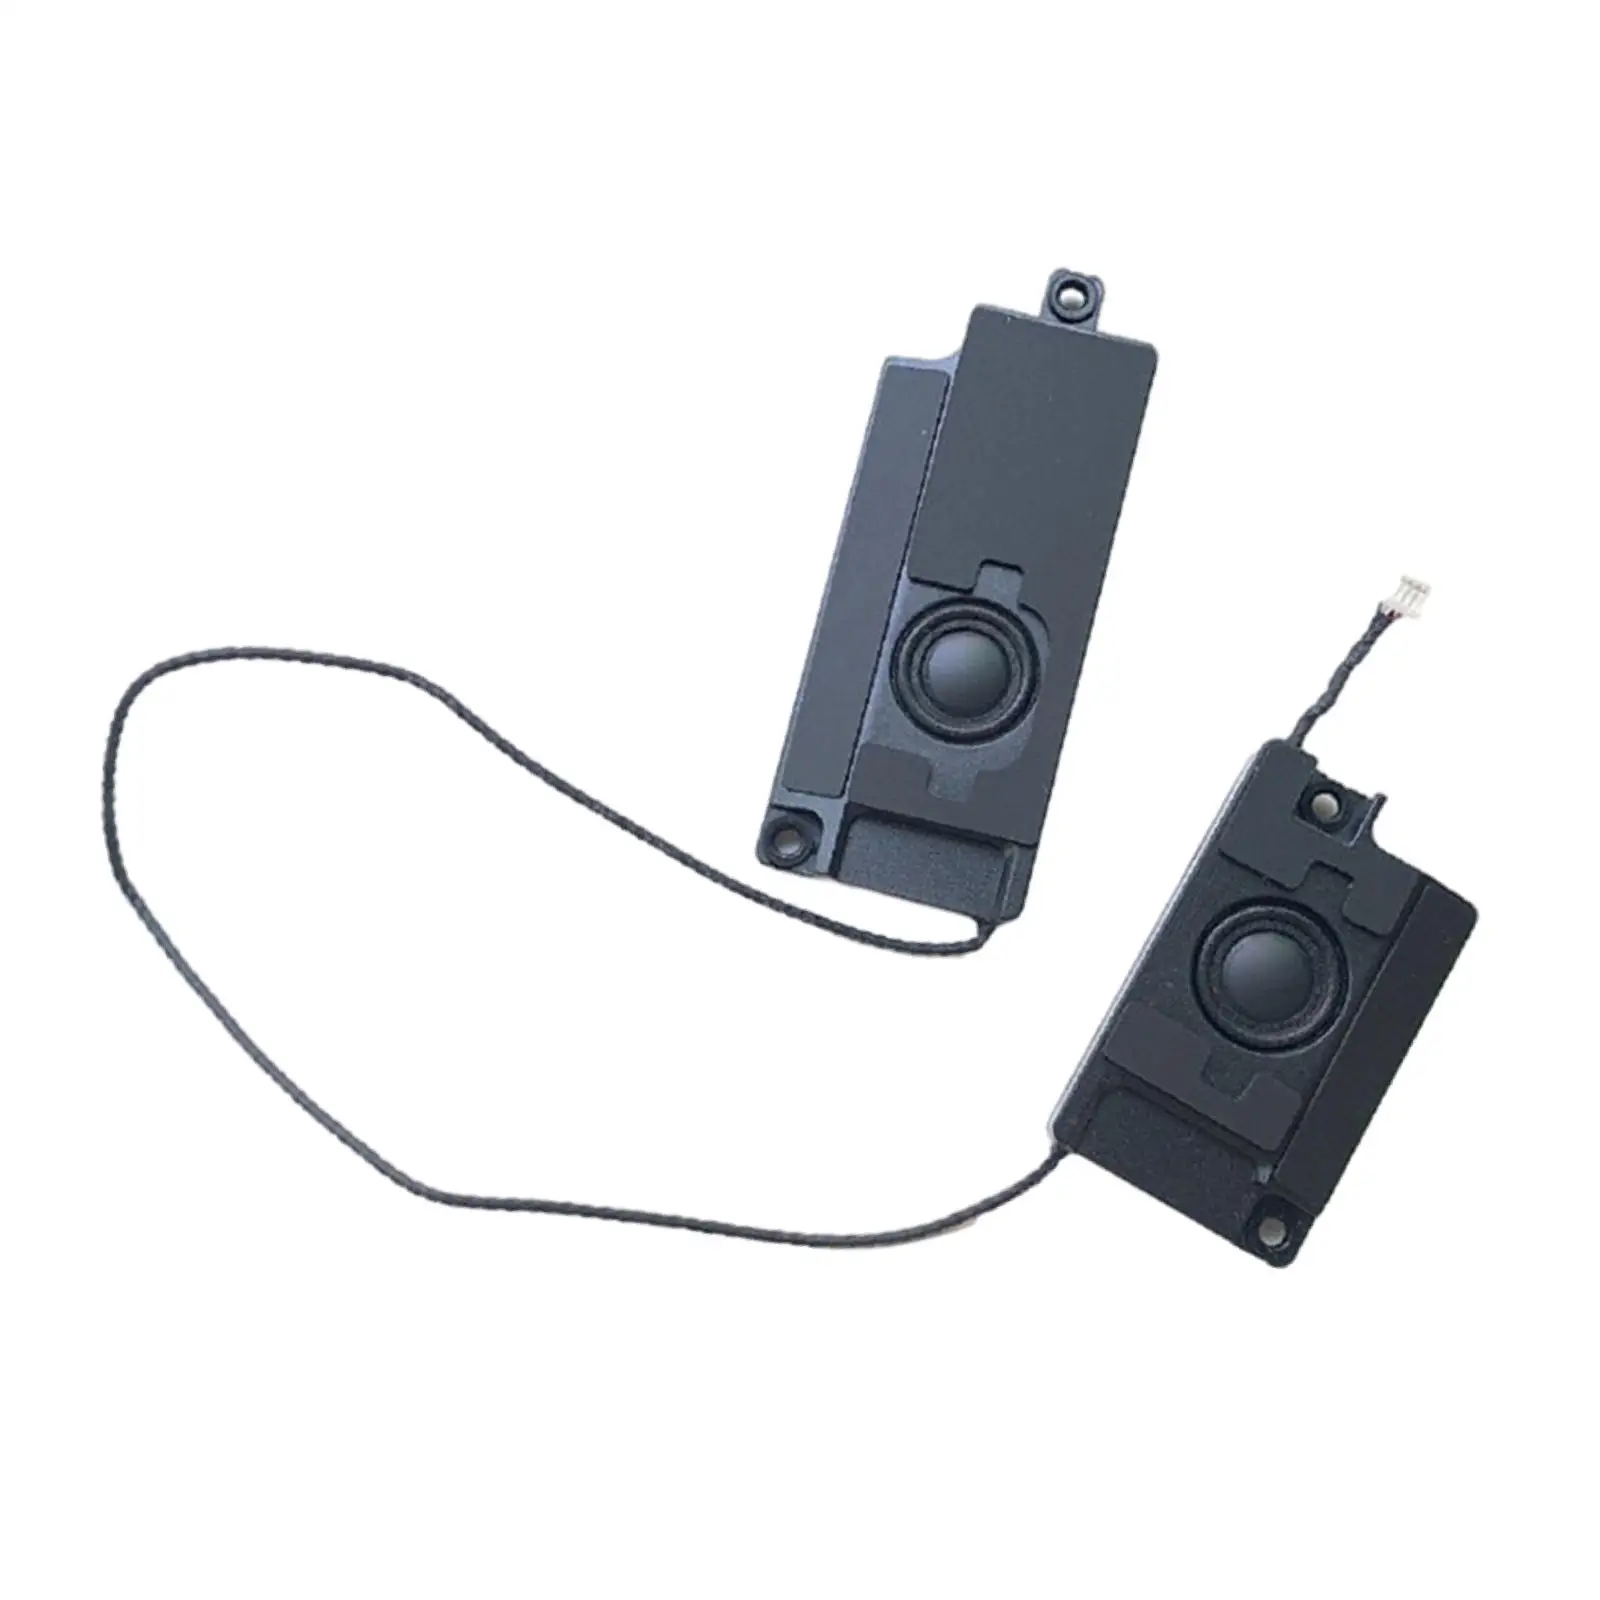 2 Pieces Built-In Speakers 02HL004 Left and Right Replace Part for Lenovo x390 ThinkPad x395 Laptop Notebook